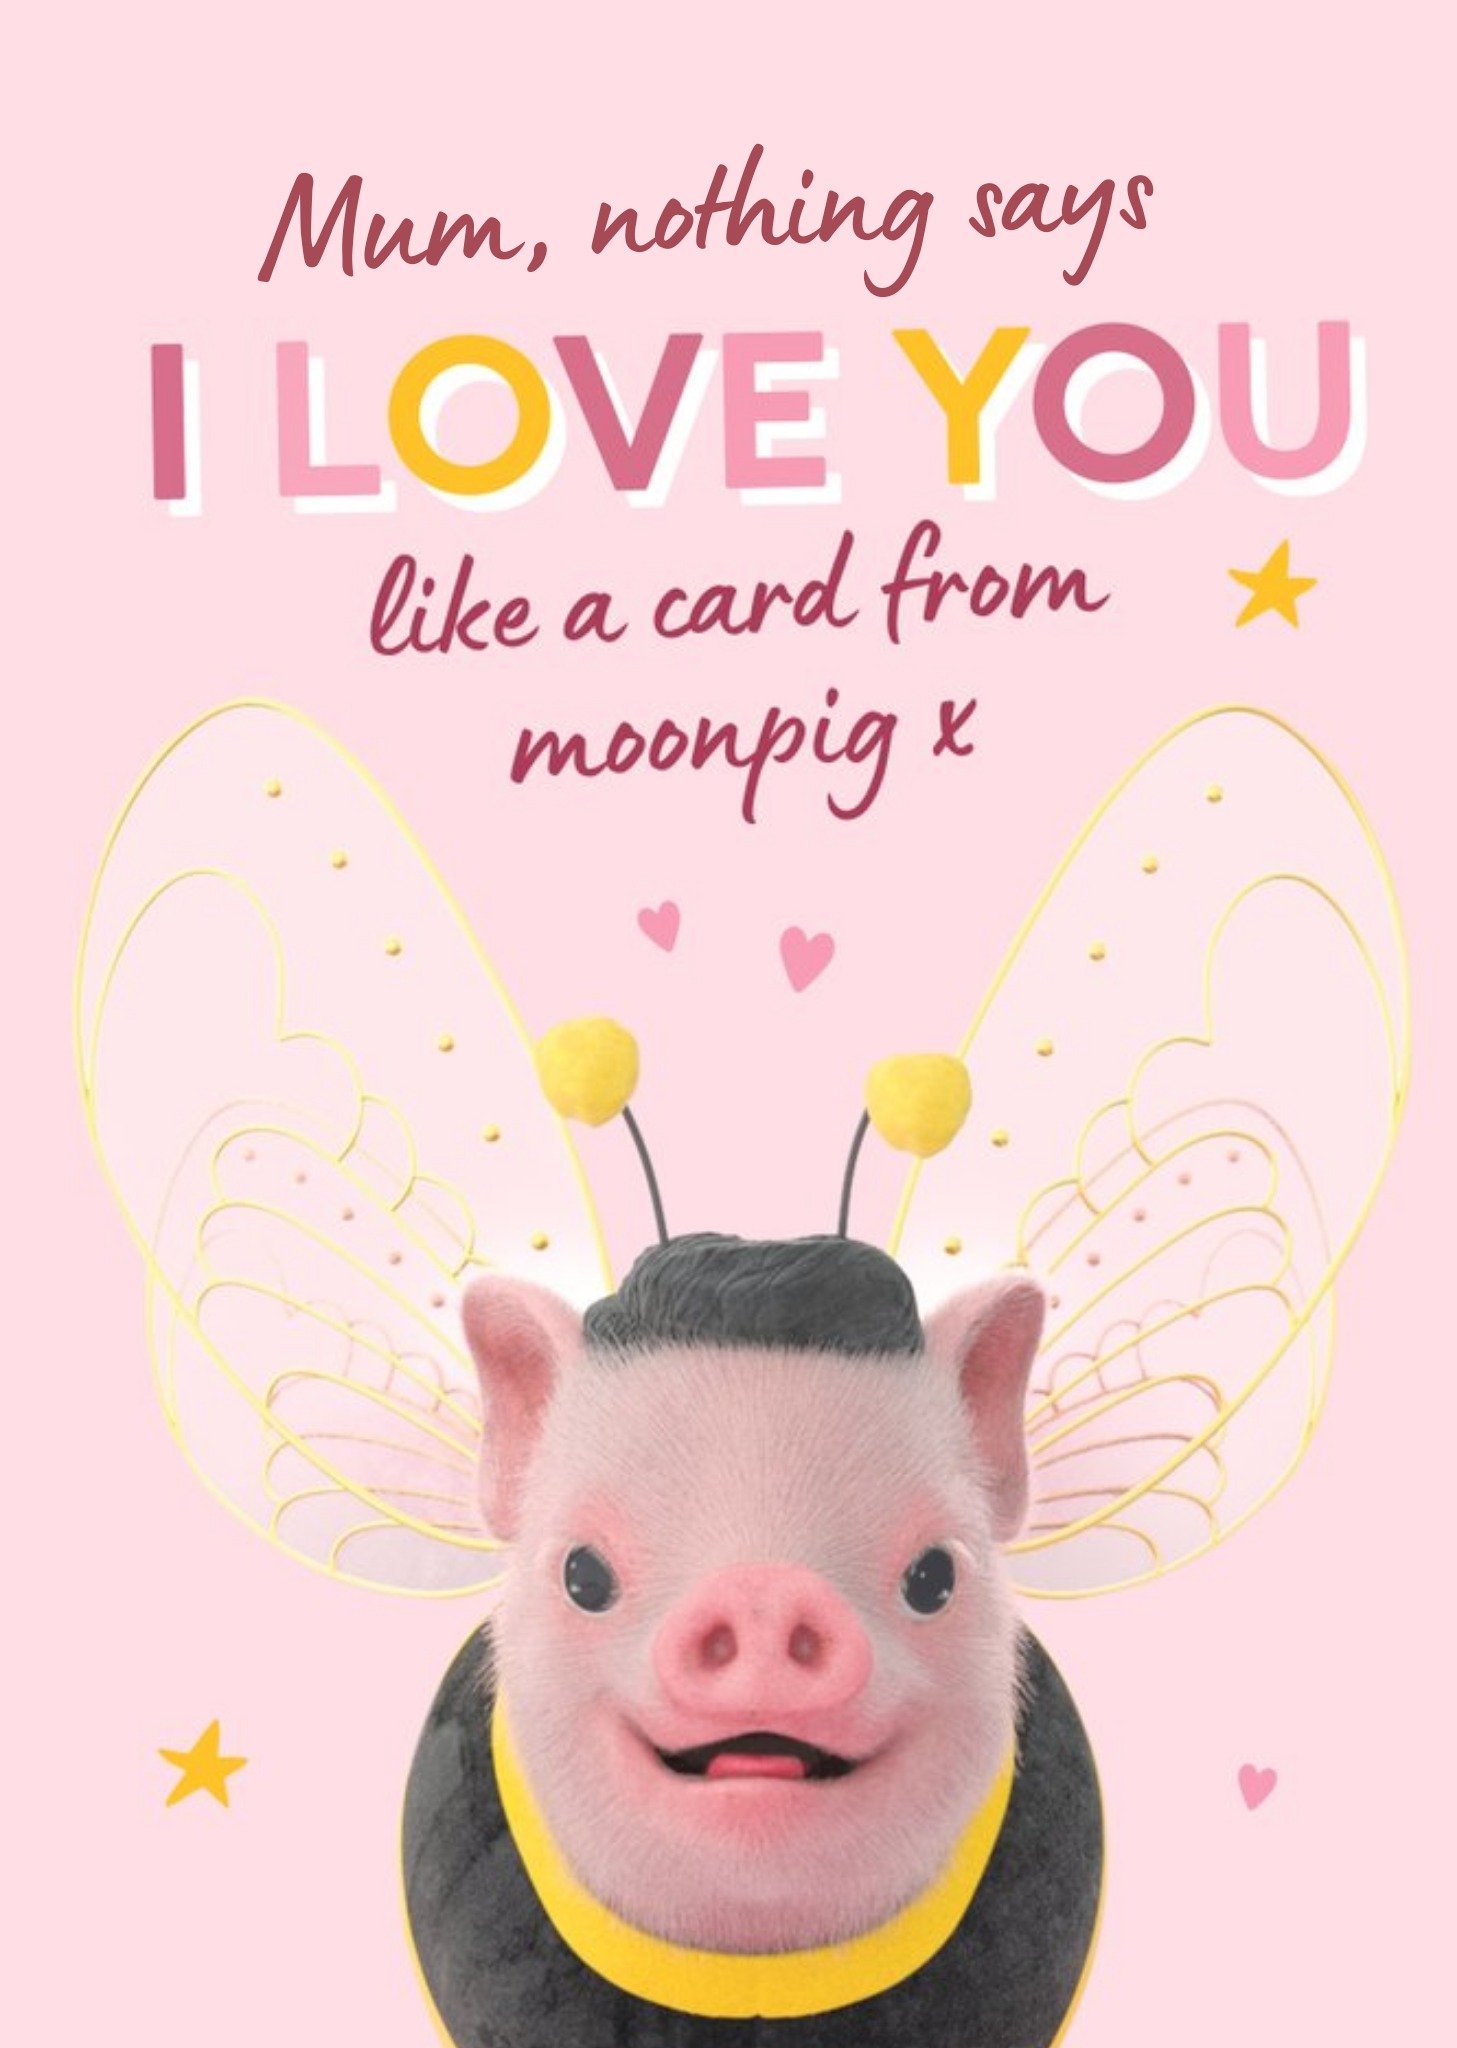 Moonpigs Cute Bumble Bee Pig Mother's Day Card, Large